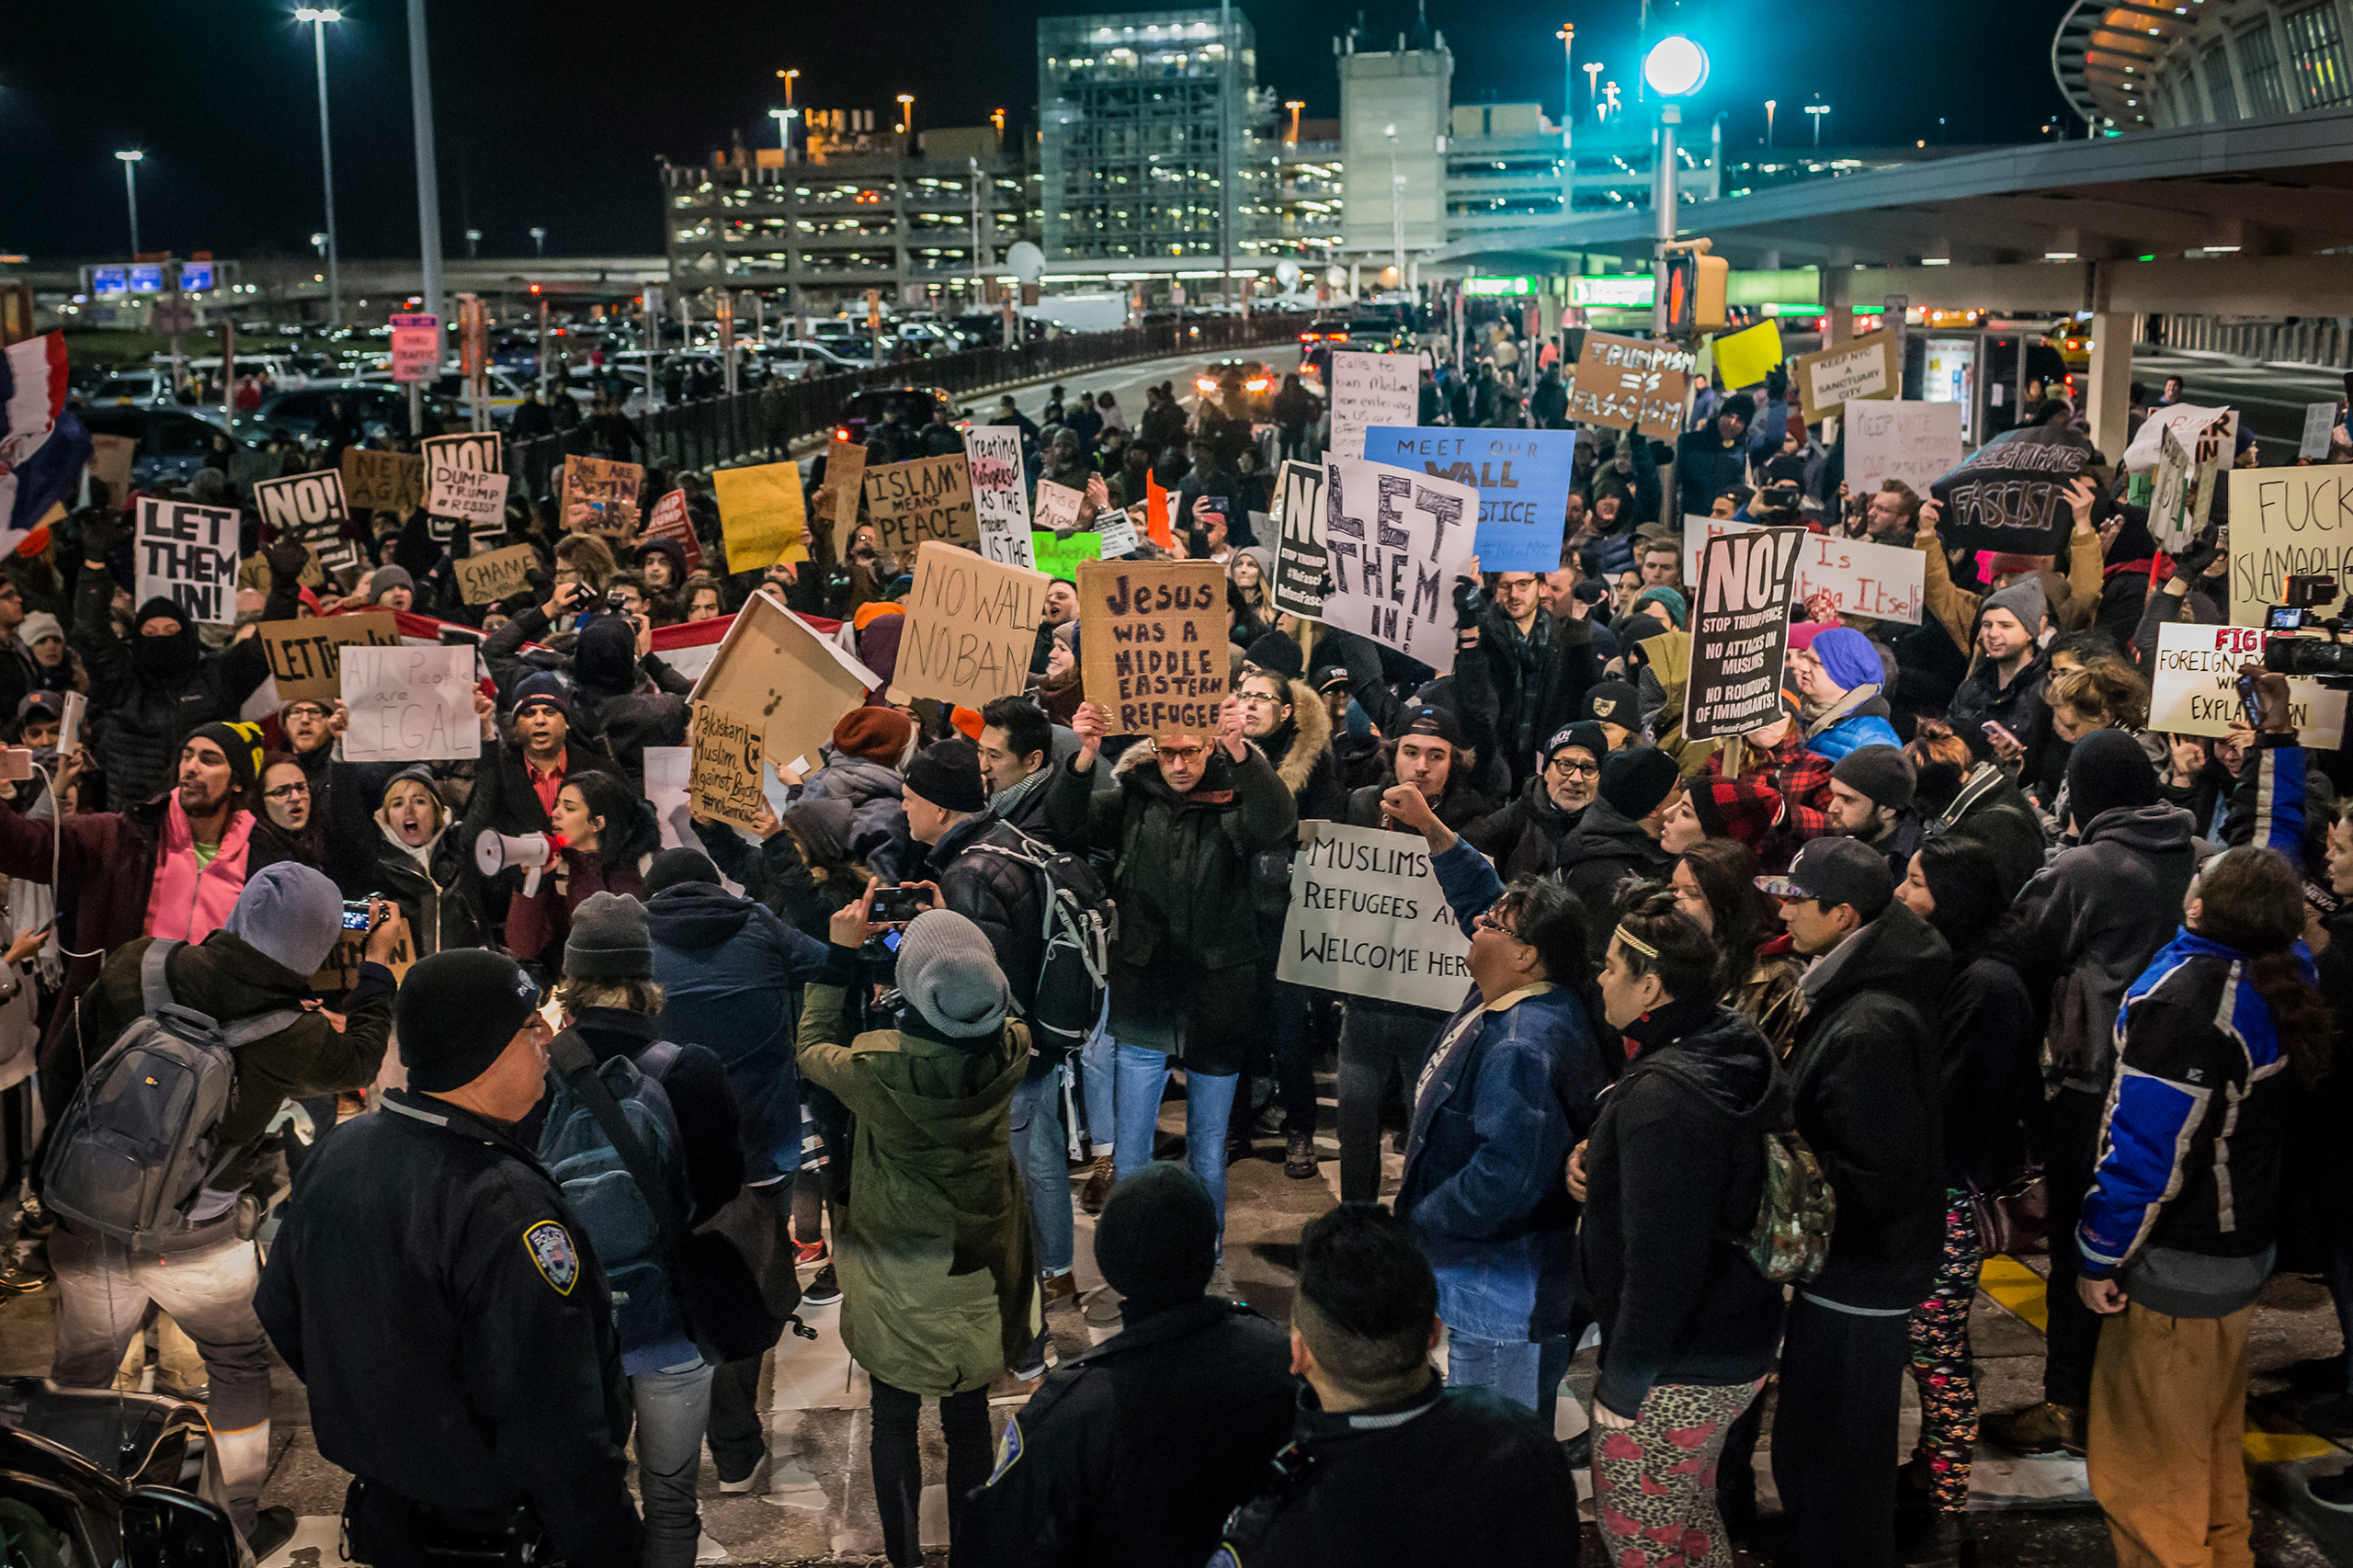 For over 8 hours on Jan. 28, 2017, thousands flooded into Terminal 4 at New York's John F. Kennedy International Airport, at times shutting down the hub while protesting Donald Trump's executive order banning Muslims from certain countries from traveling to the U.S. Around 8 p.m. that evening, the federal court for the Eastern District of New York issued an emergency stay halting the ban. (Michael Nigro—Pacific Press/LightRocket/Getty Images)